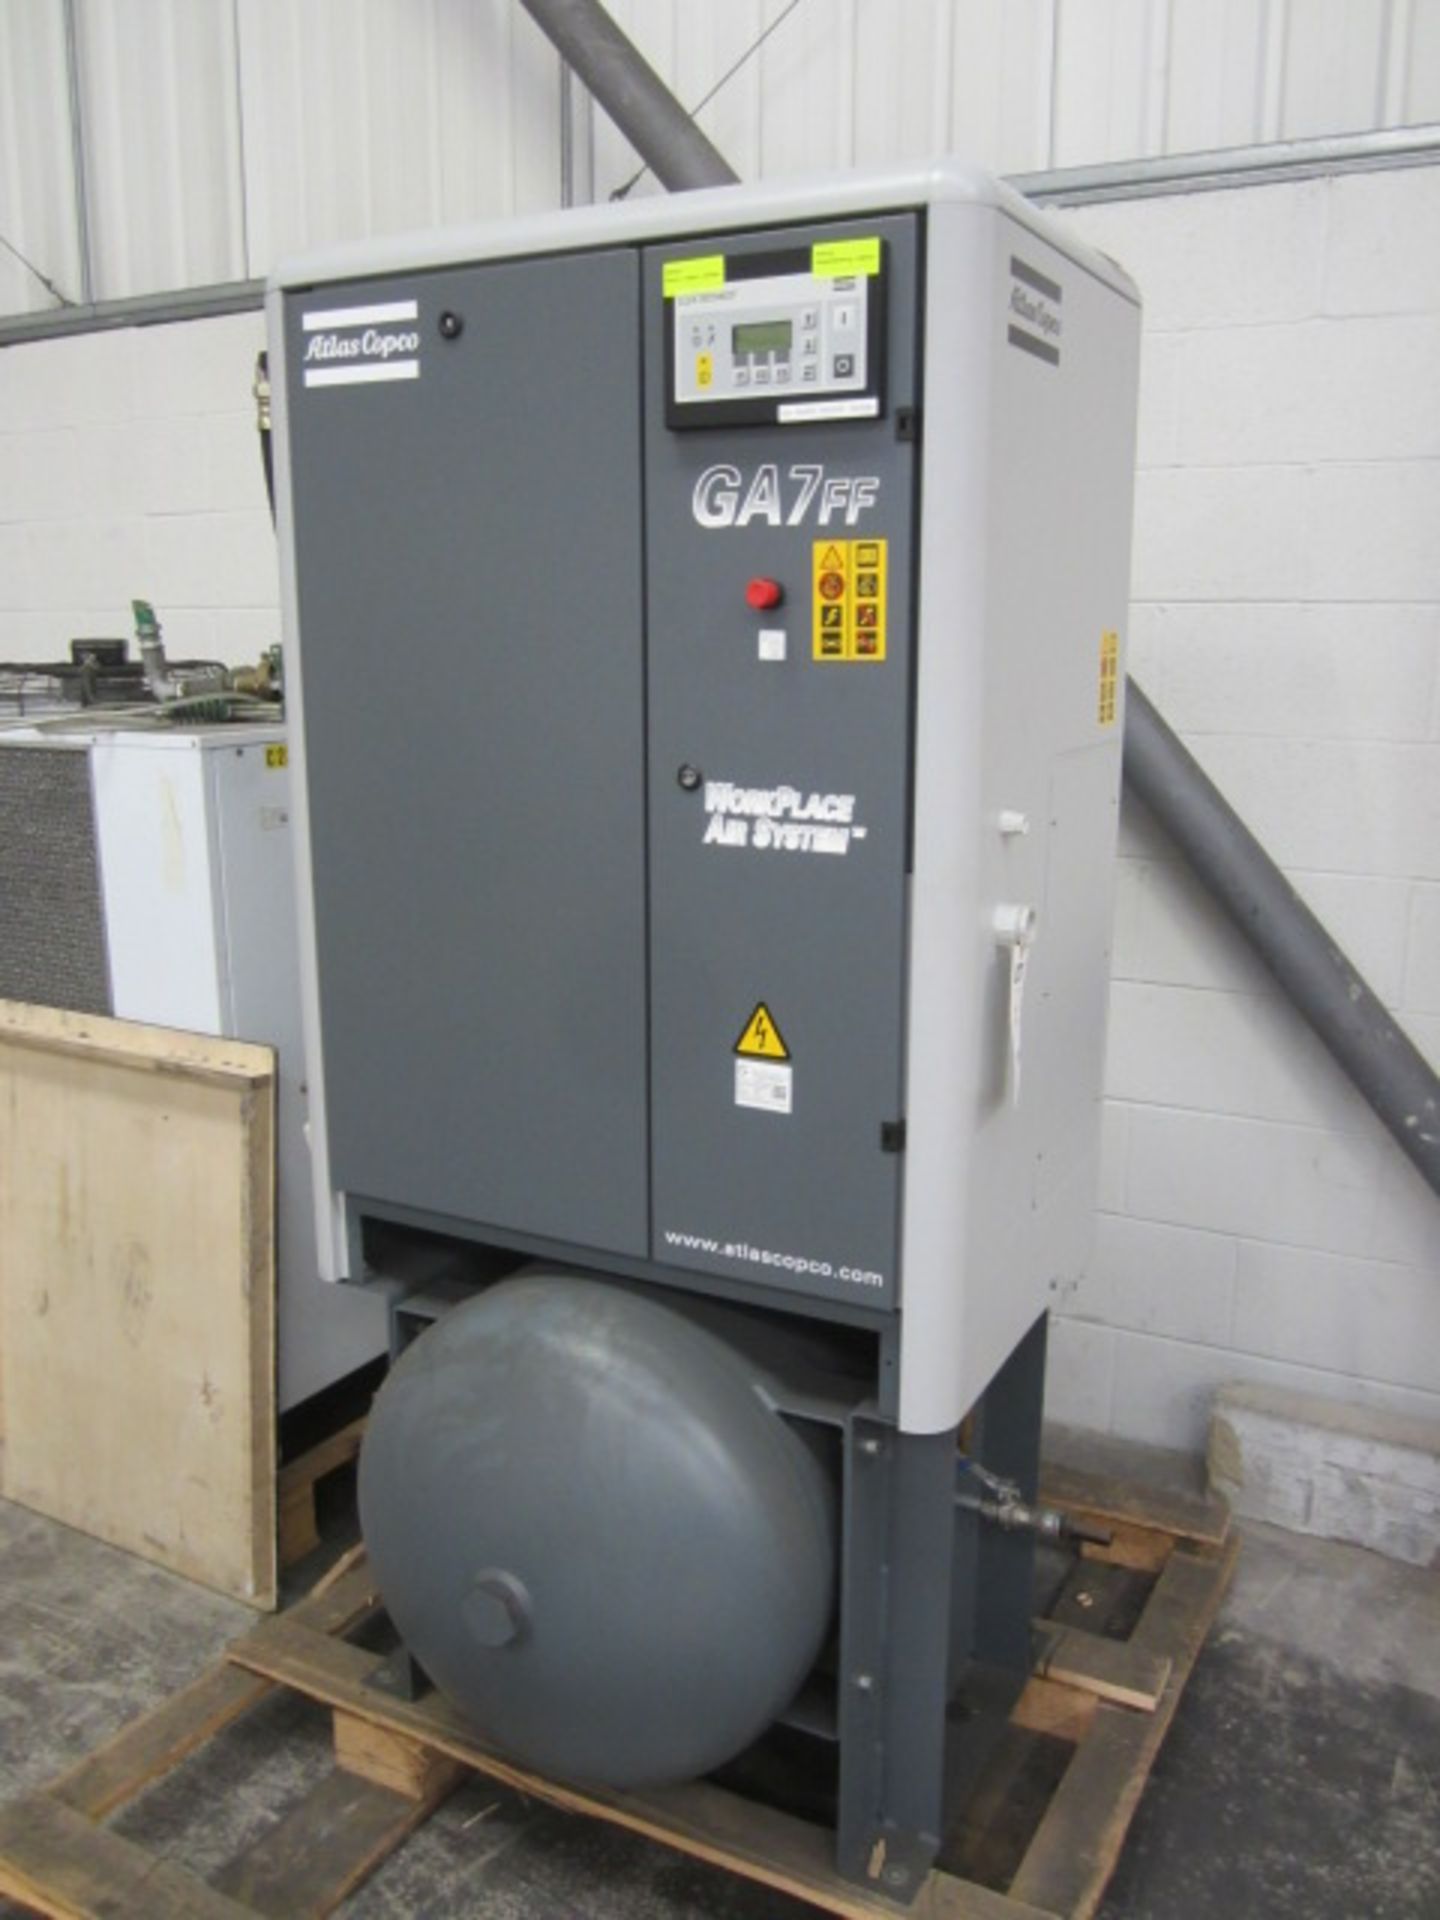 Atlas Copco GA7FF Workplace Air System receiver mounted air compressor, serial number AII137945 (